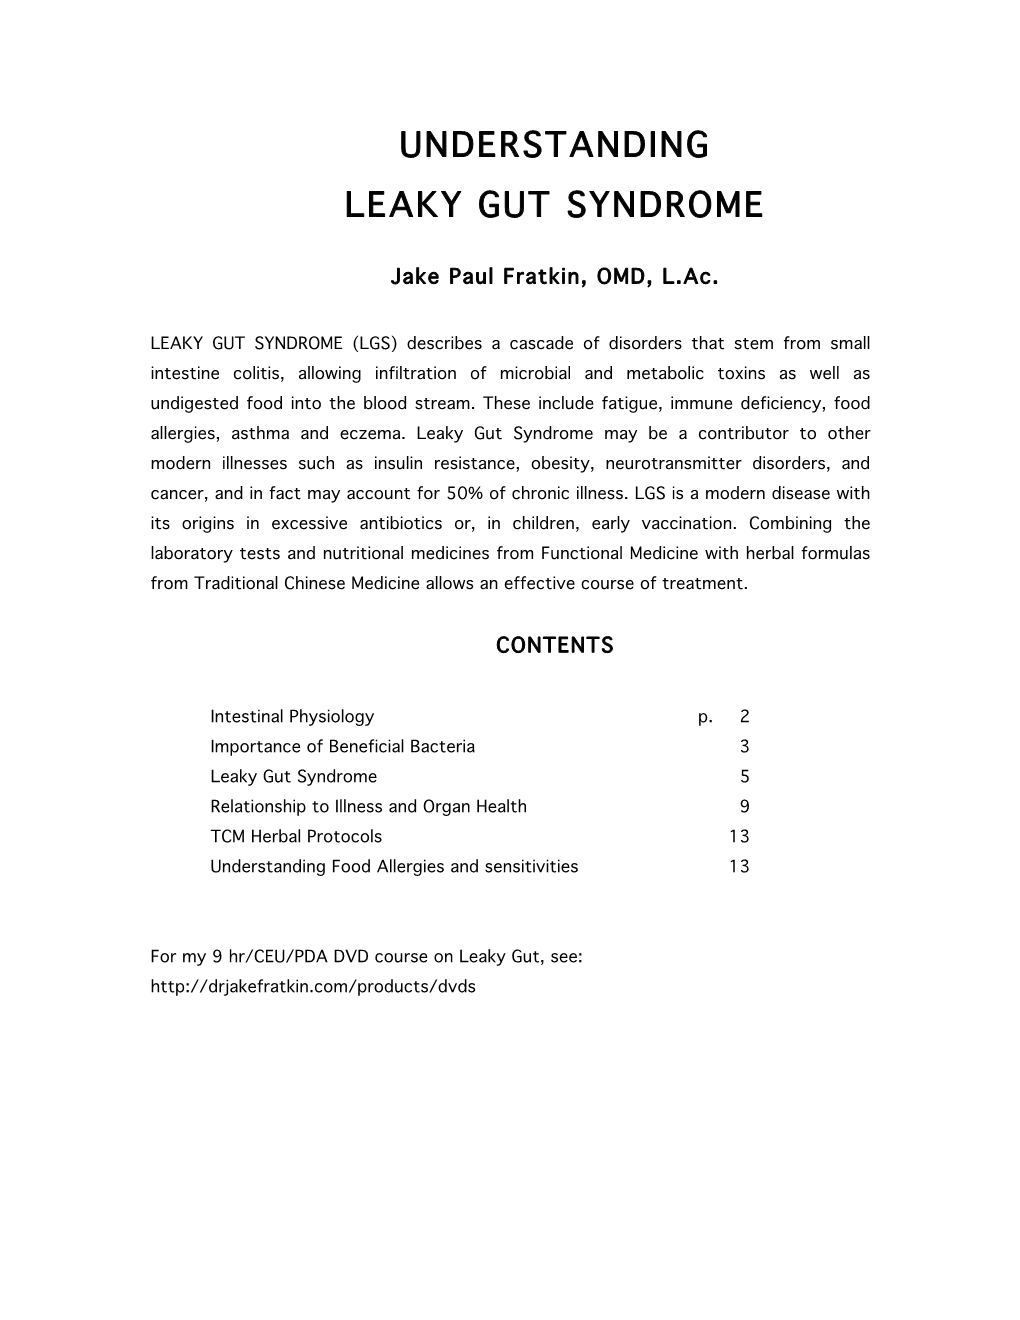 Understanding Leaky Gut Syndrome